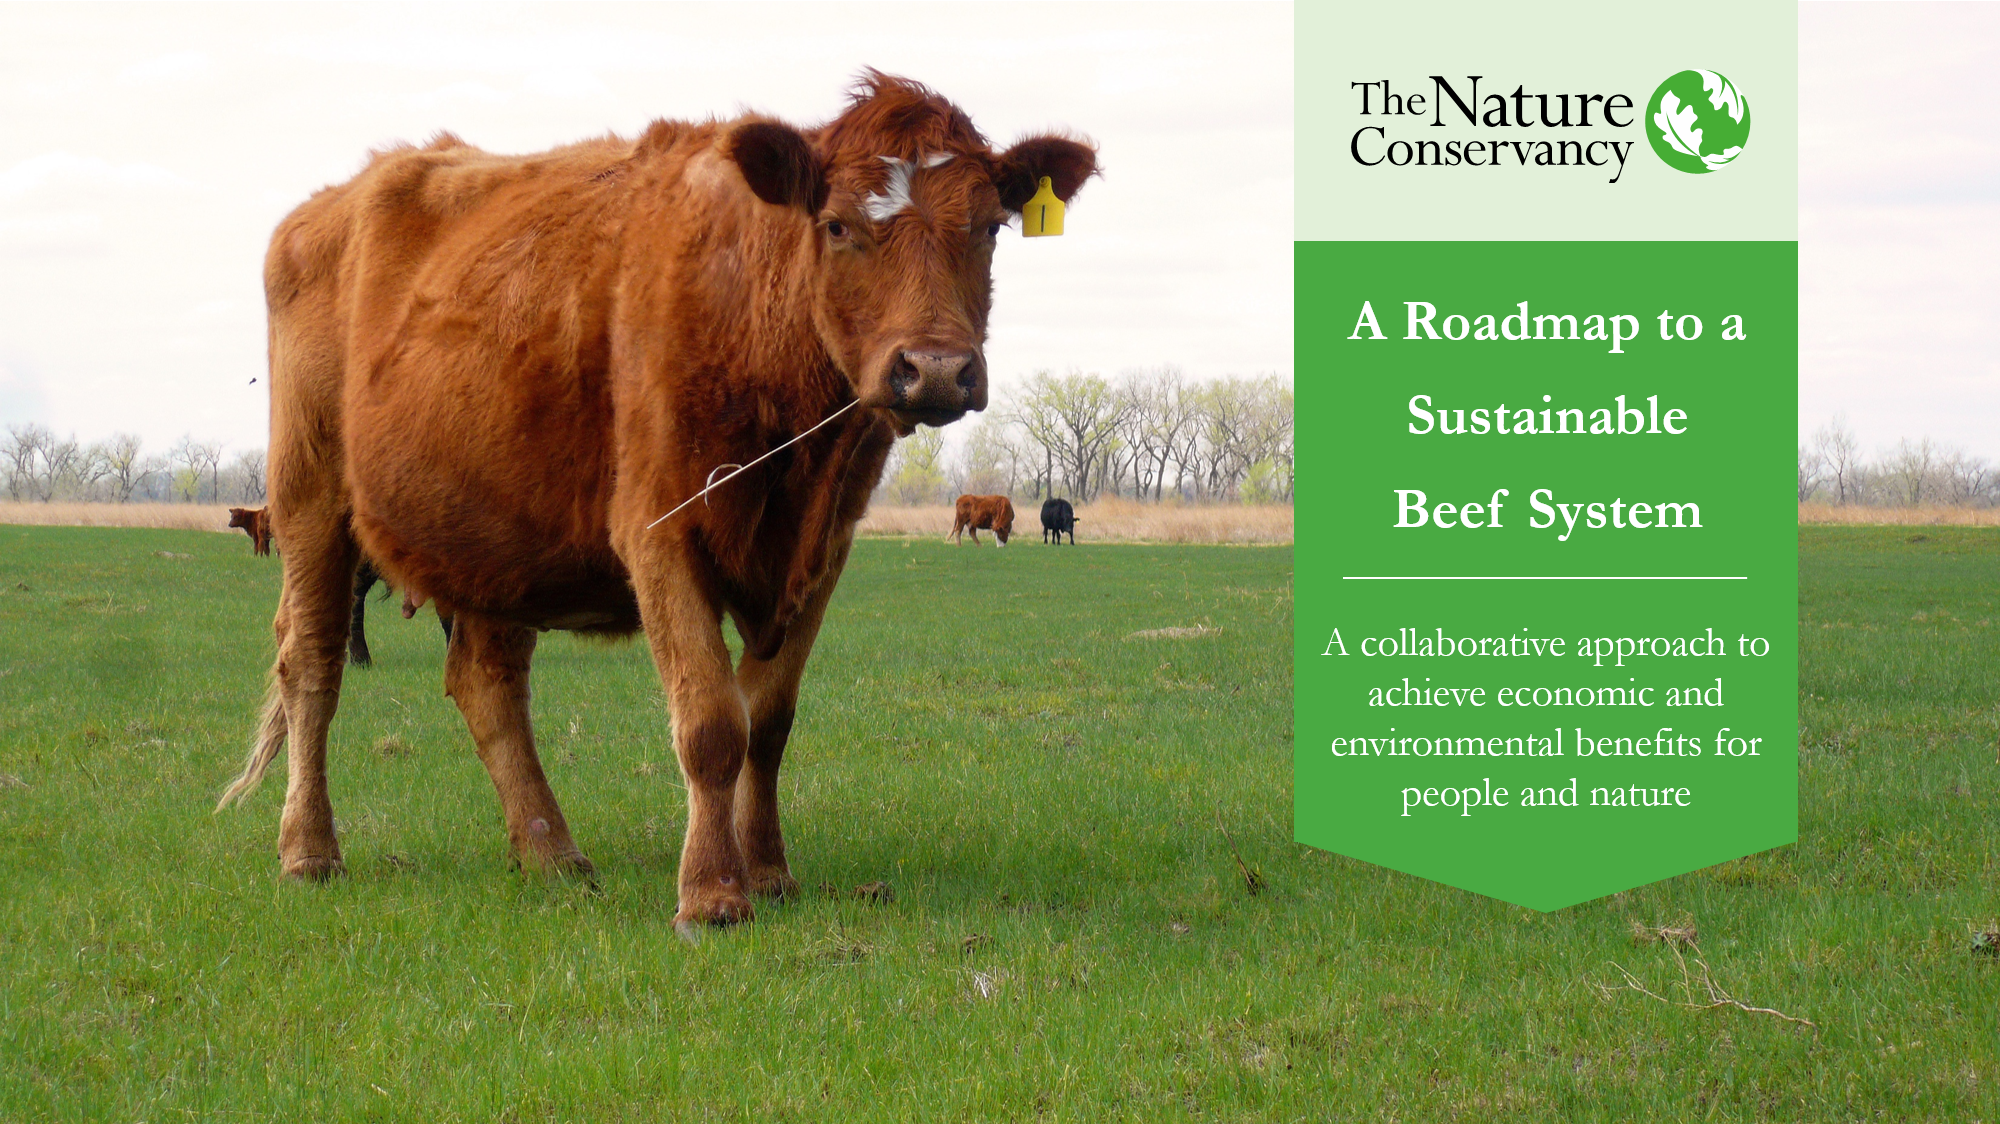 A Roadmap to Sustainable Beef document